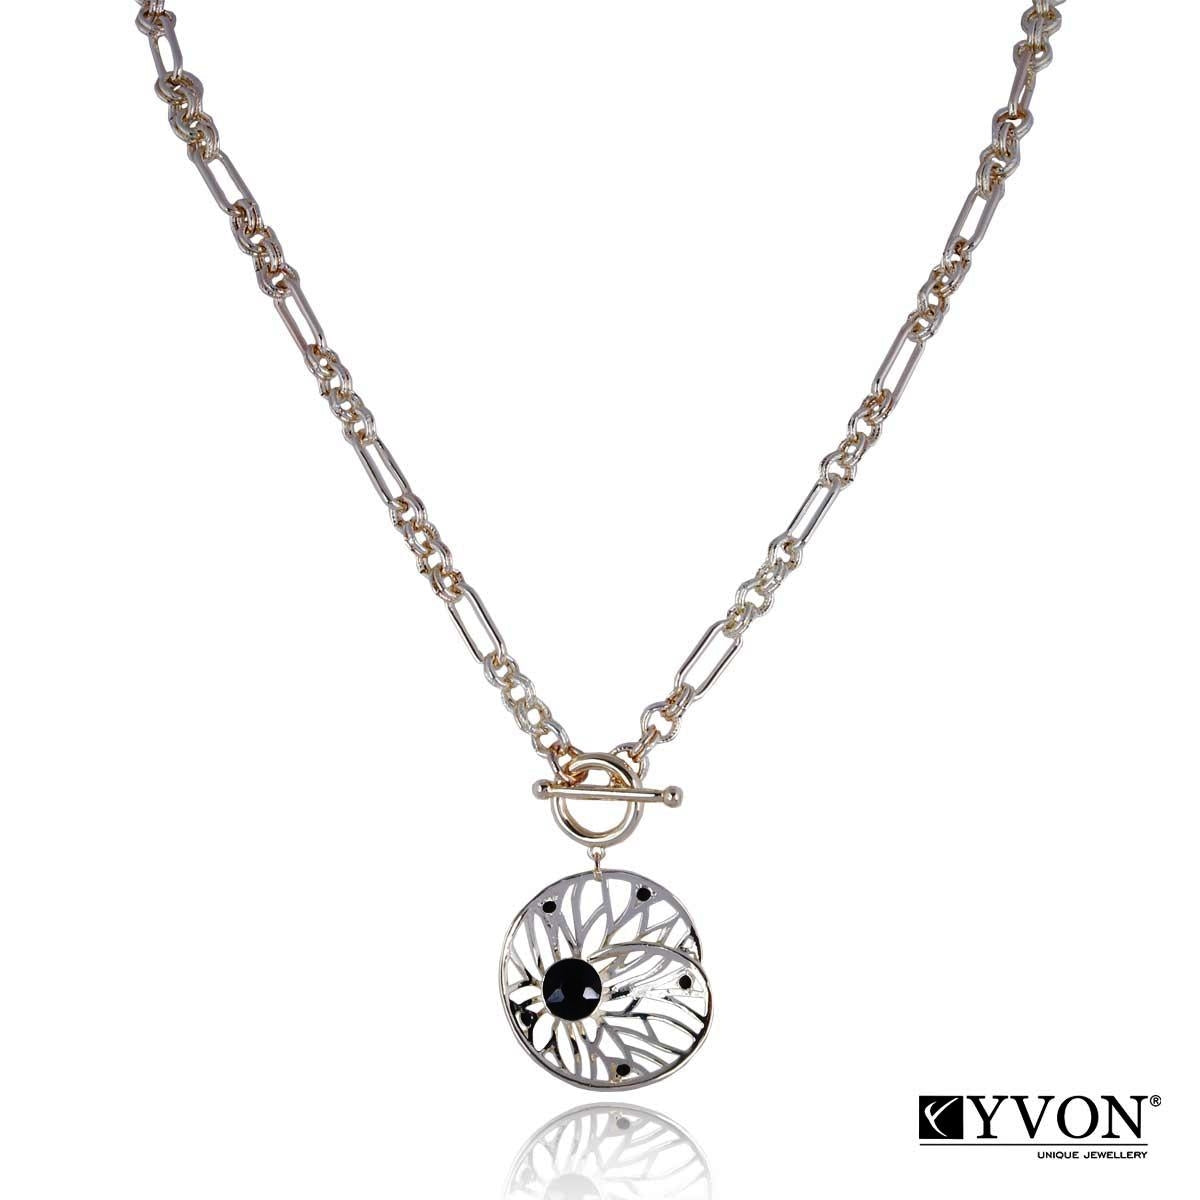 Elegant Long Chain Necklace with Flower Pendant and Black Crystal